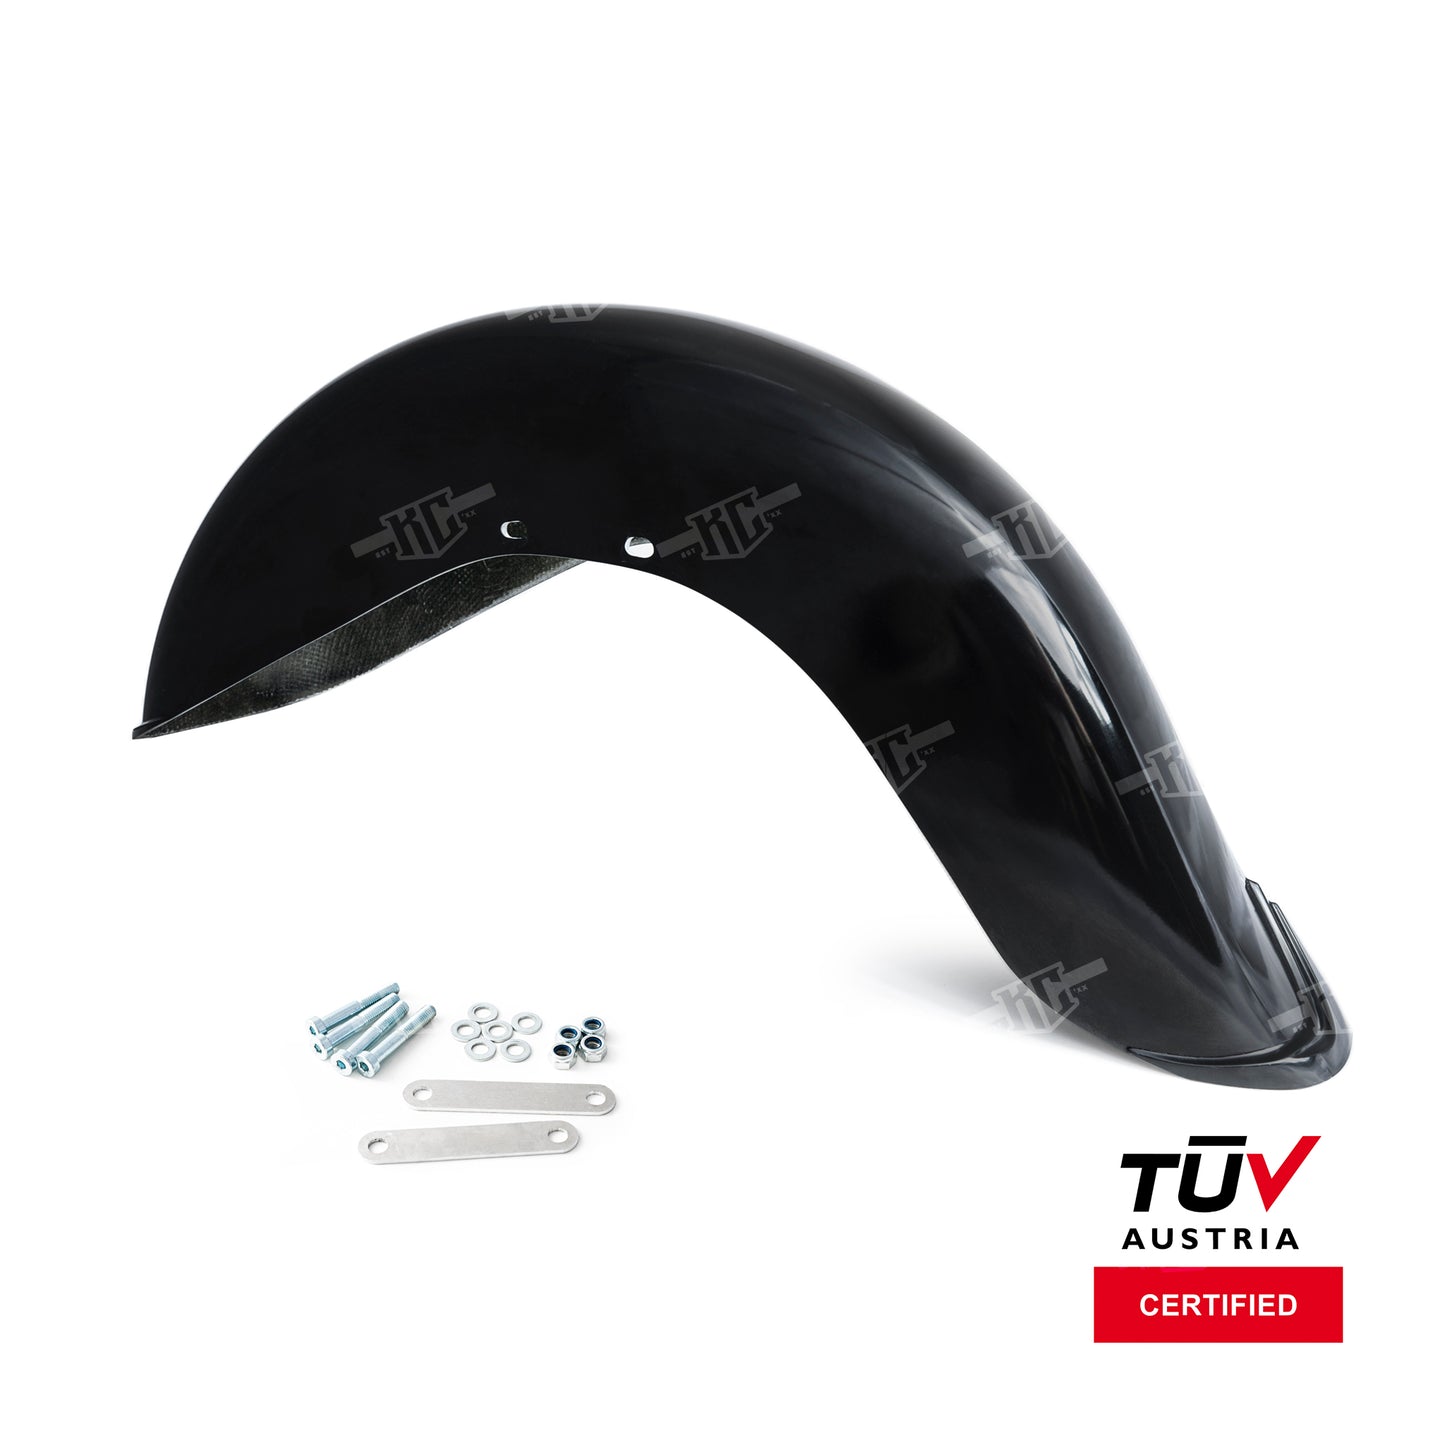 2000-2024 "Classic" Front Fender For Softail